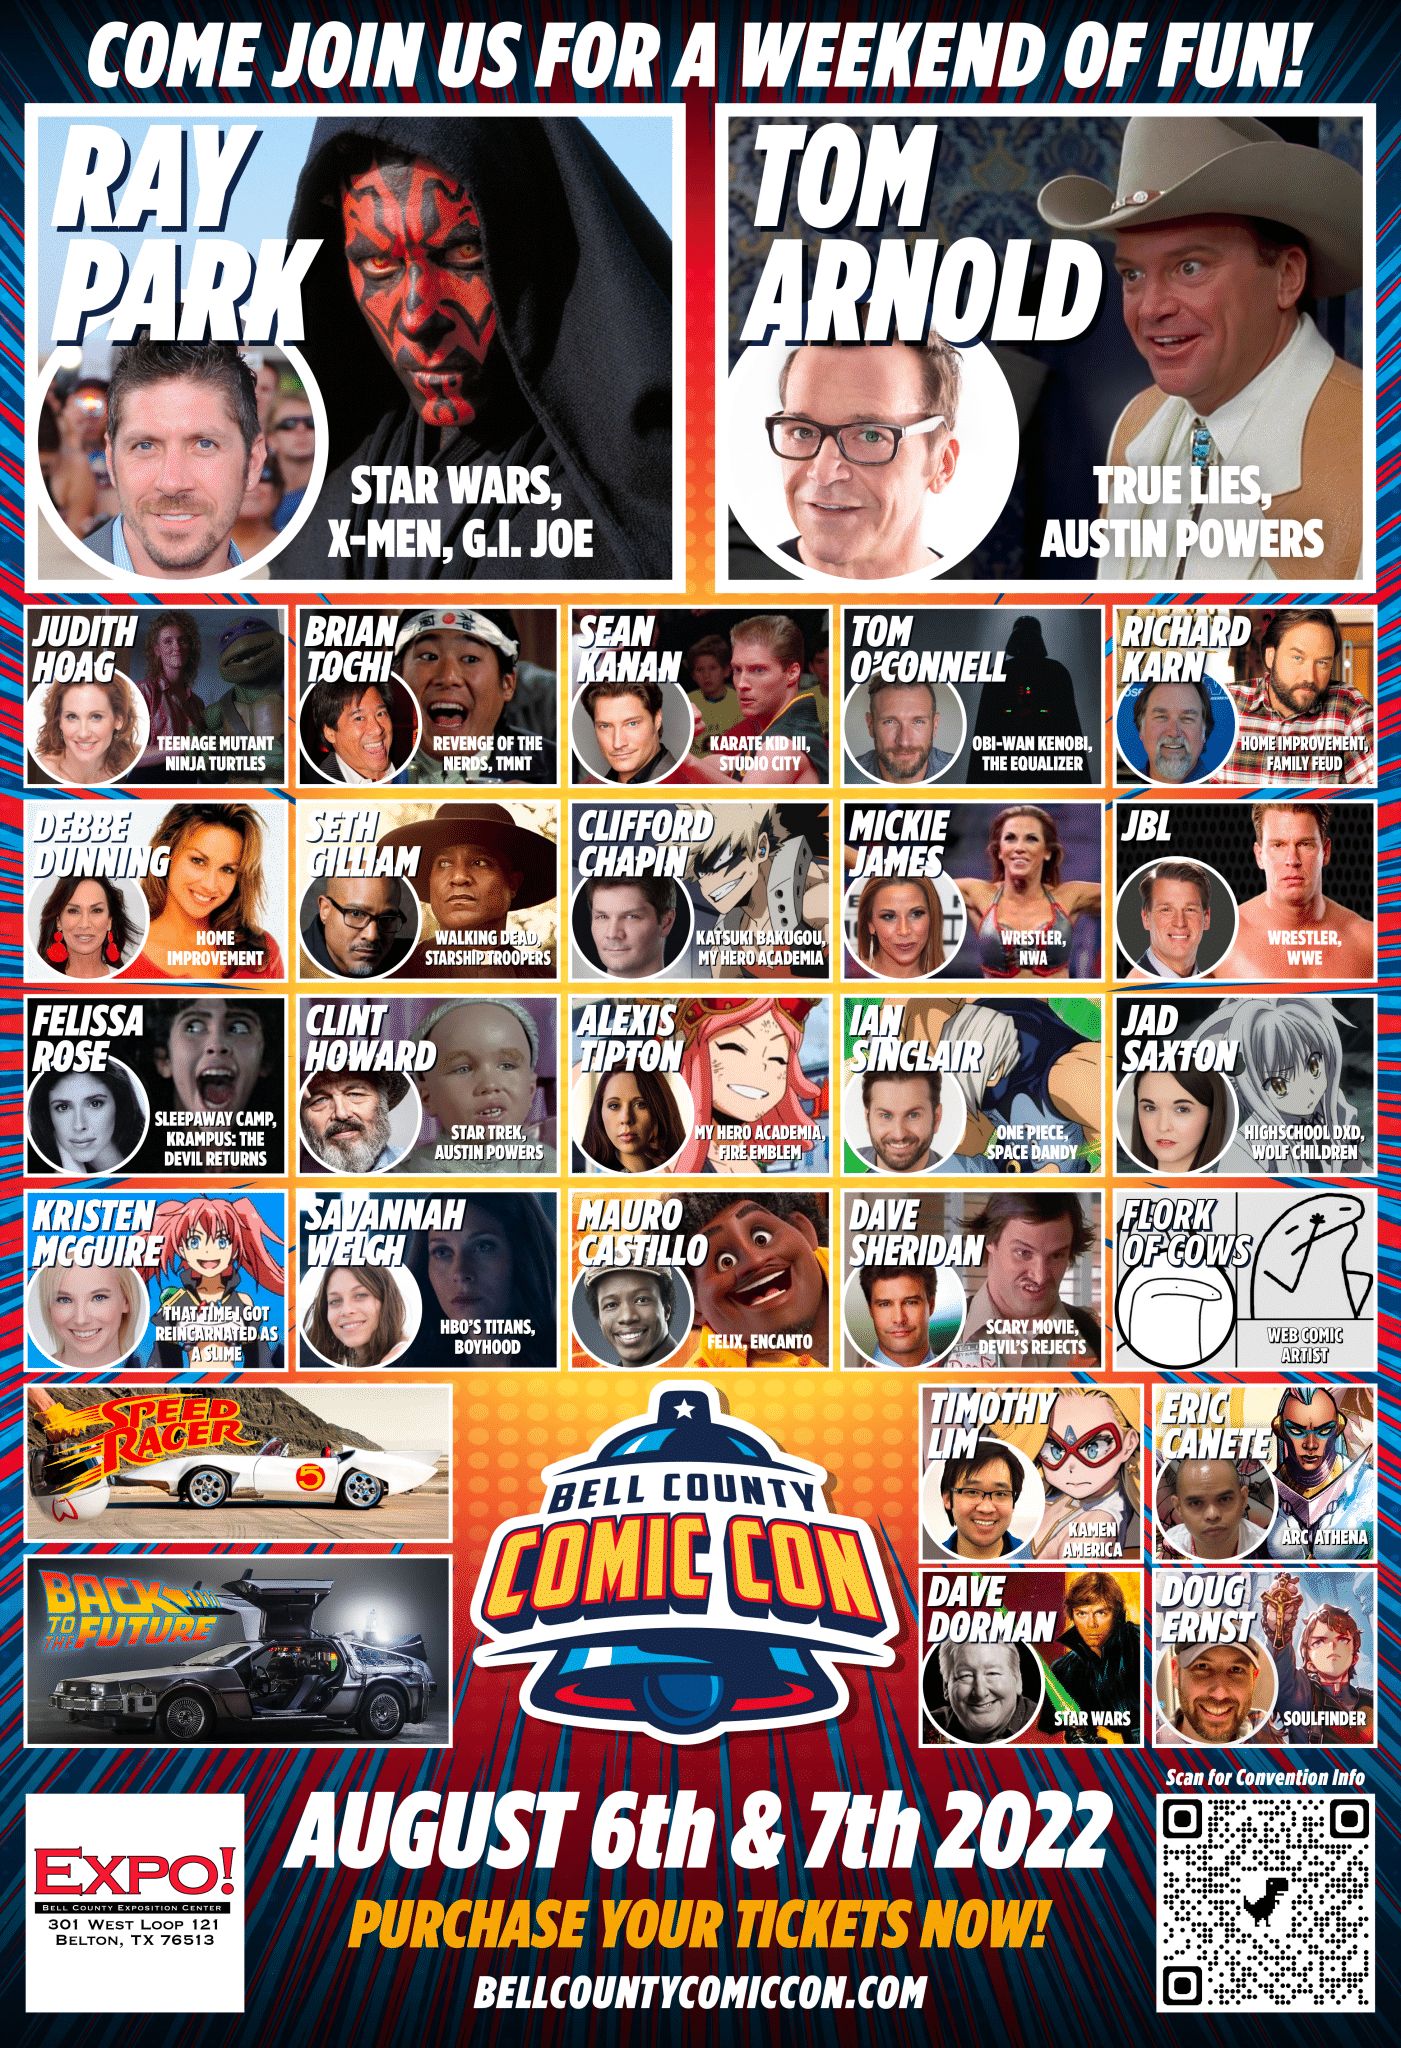 Bell County Comic Con on Twitter "***EPIC LINE UP*** MEET YOUR